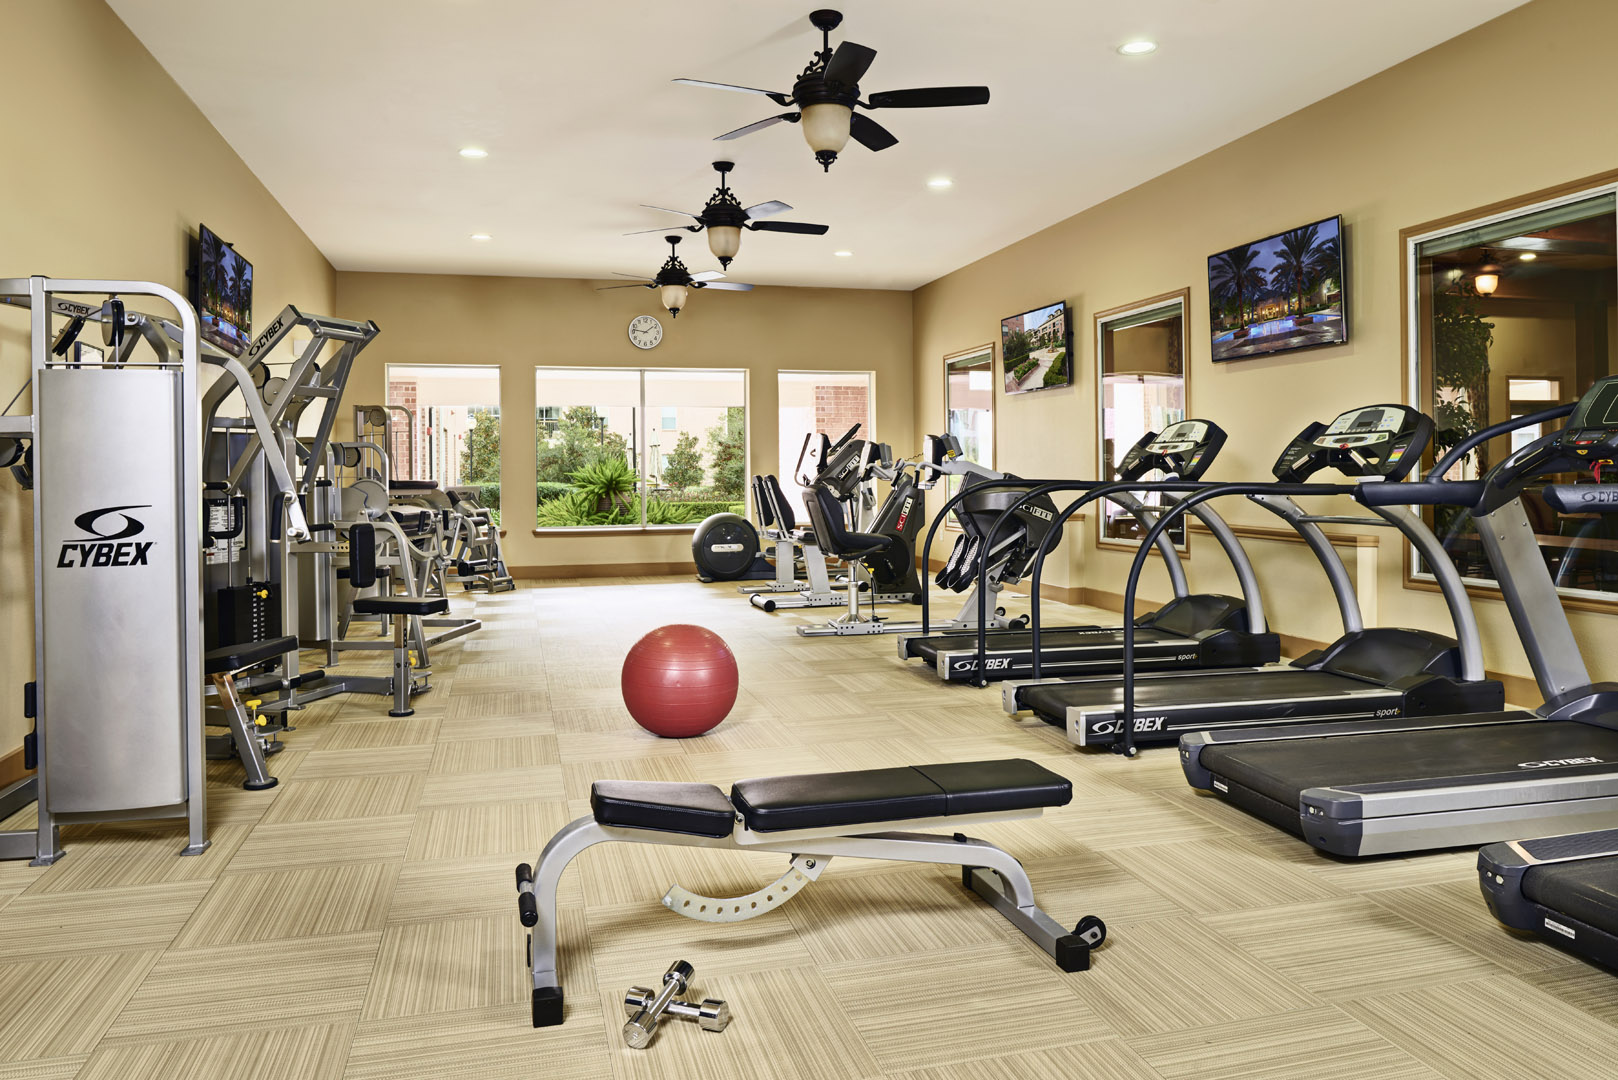 Amenities - Cardio and Free Weights